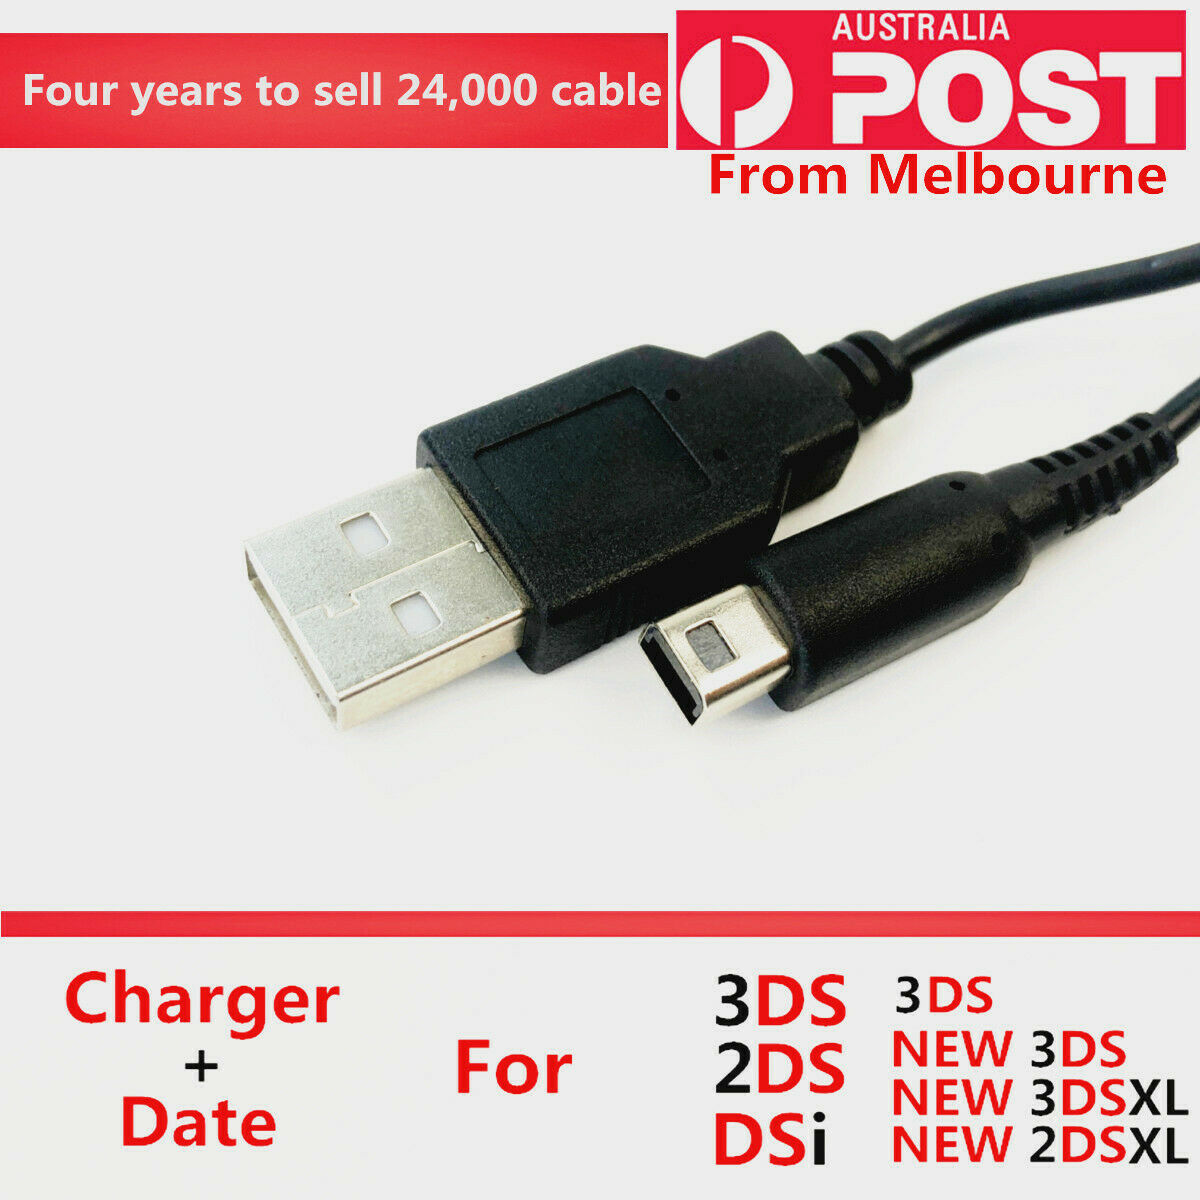 USB Charger Charging Cable for Nintendo DSi 2DS 3DS 3DSXL New2DS New3DS New3DSXL Model: Nintendo DSI 2DS 3DS and Ne